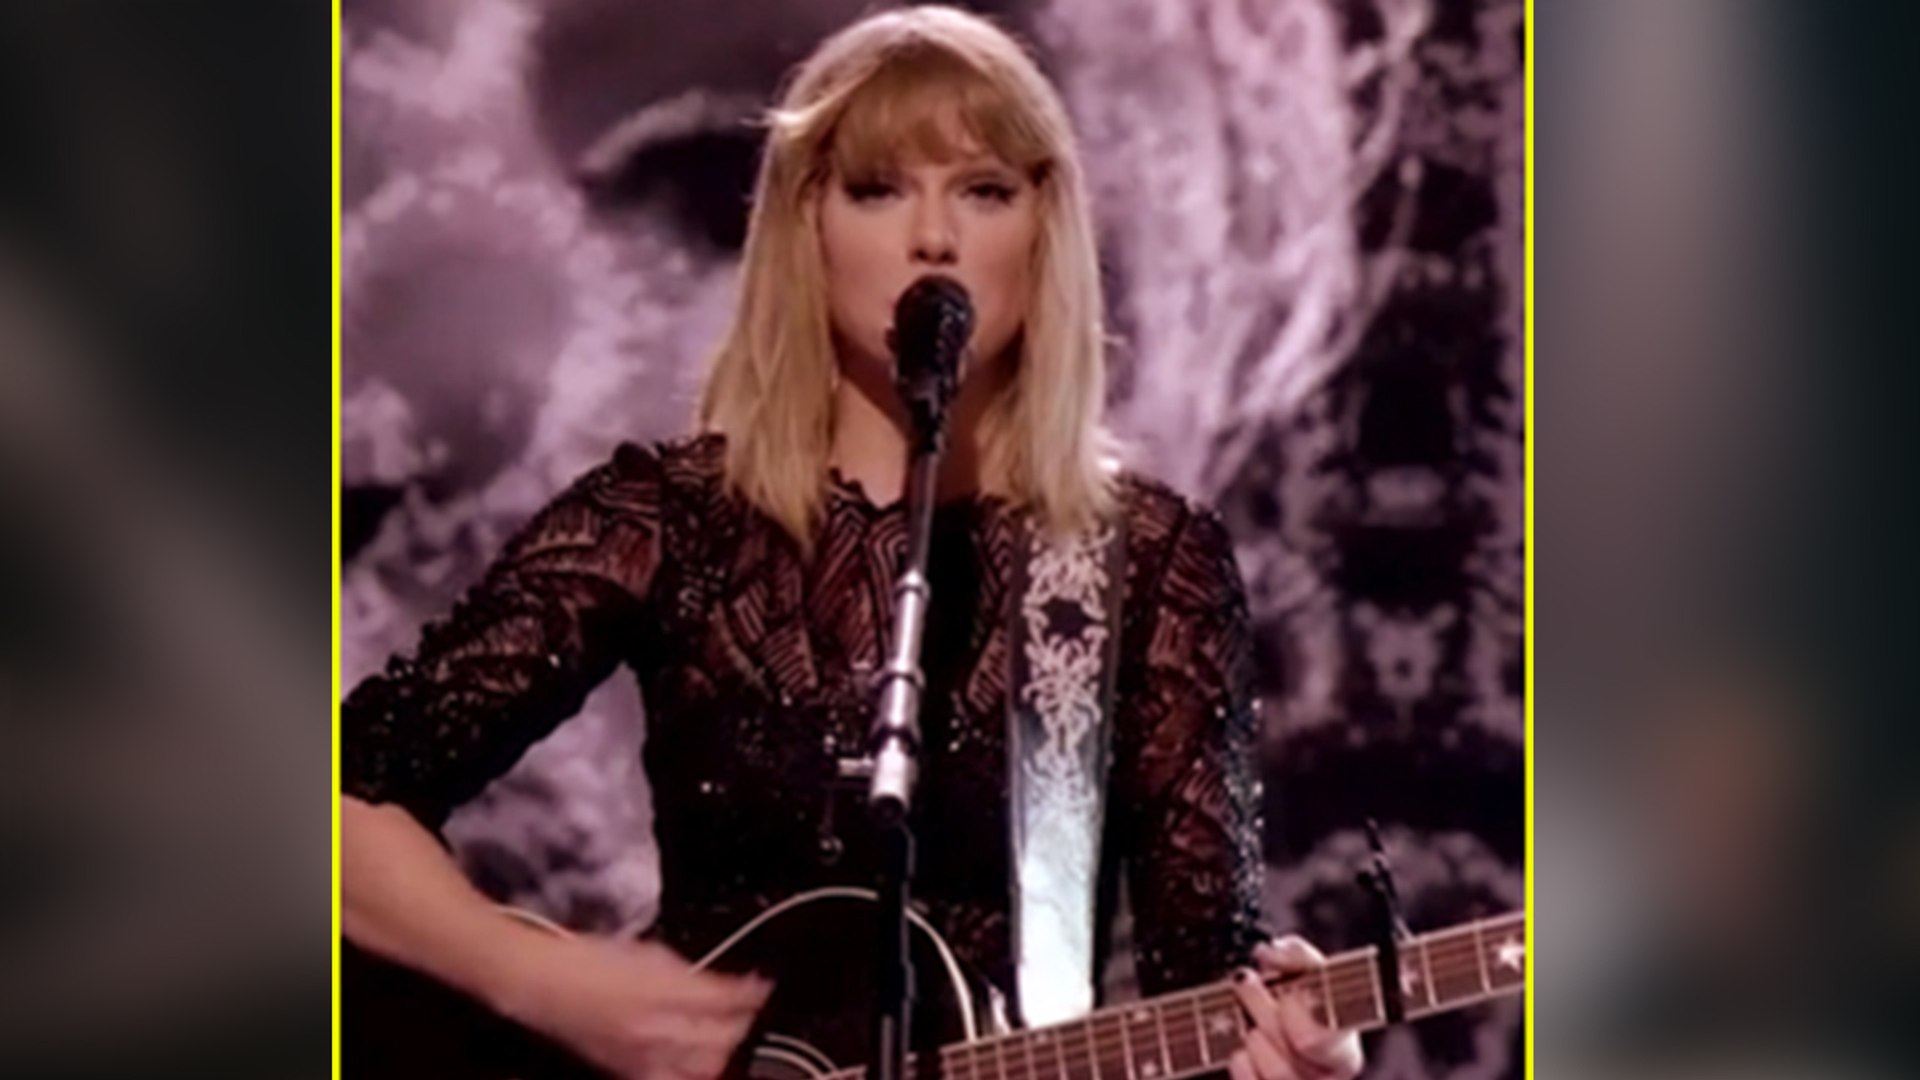 Taylor Swift Perform 'I Don't Wanna Live Forever' Live at Houston Concert